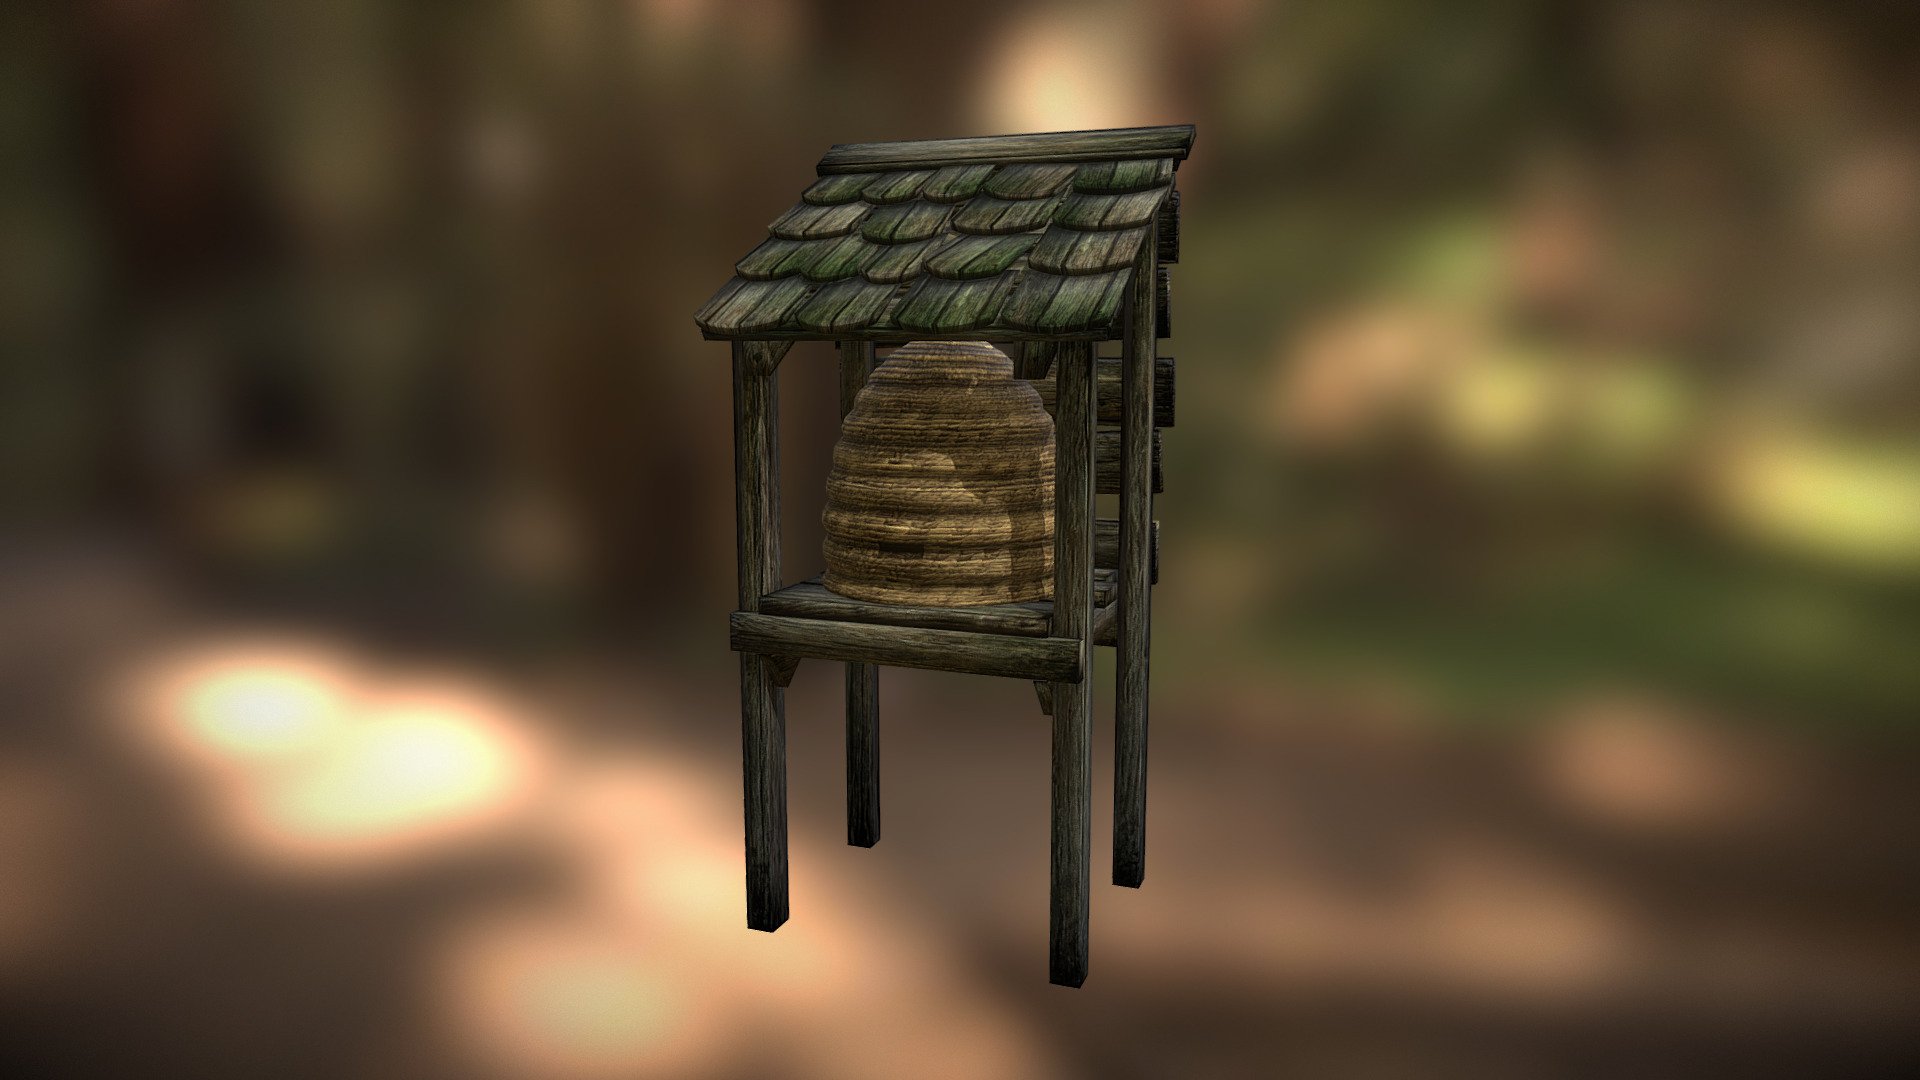 An asset I created for the TES5 Modding Project Beyond Skyrim.
(Textures taken from TES5: Skyrim by Bethesda Softworks)

Beyond Skyrim is constantly looking for talented 3D-artists to bring the world of Tamriel to life!

Learn more about Beyond Skyrim: 
https://beyondskyrim.org/
https://www.facebook.com/BeyondSkyrim/
https://discord.gg/TAzte8m - Apiary (Beyond Skyrim) - 3D model by mindmonkey 3d model